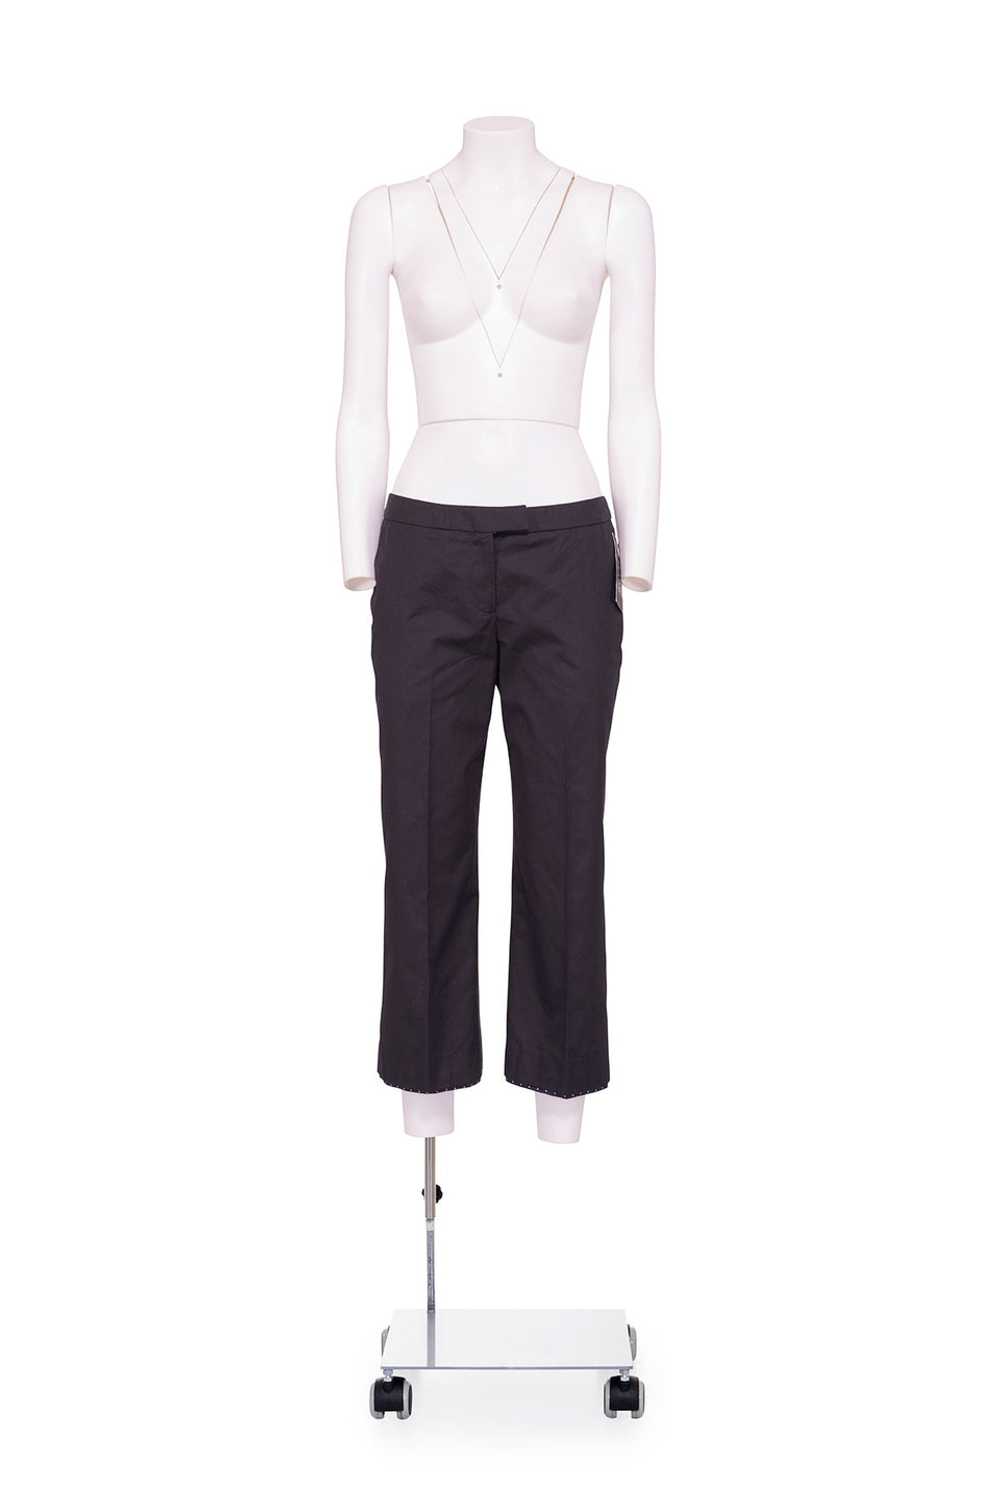 ALEXANDER MCQUEEN LOW RISE CROPPED TROUSERS - image 1